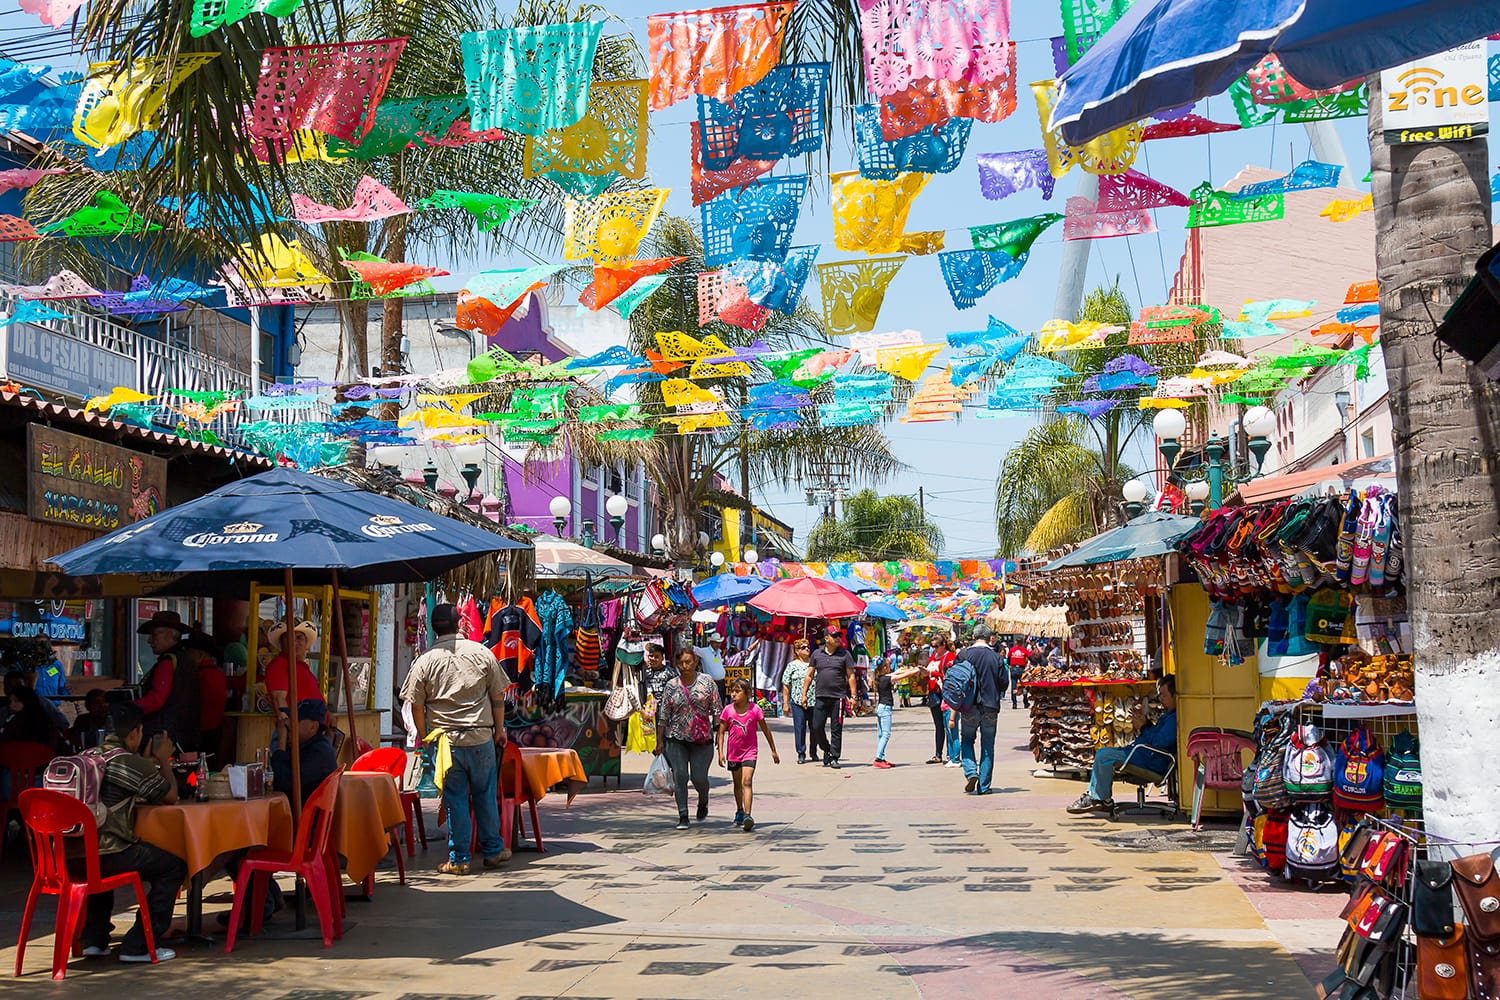 People shop and walk below colorful hanging flags at Plaza Santa Cecilia, a historic Mexican square in the heart of Tijuana, Mexico